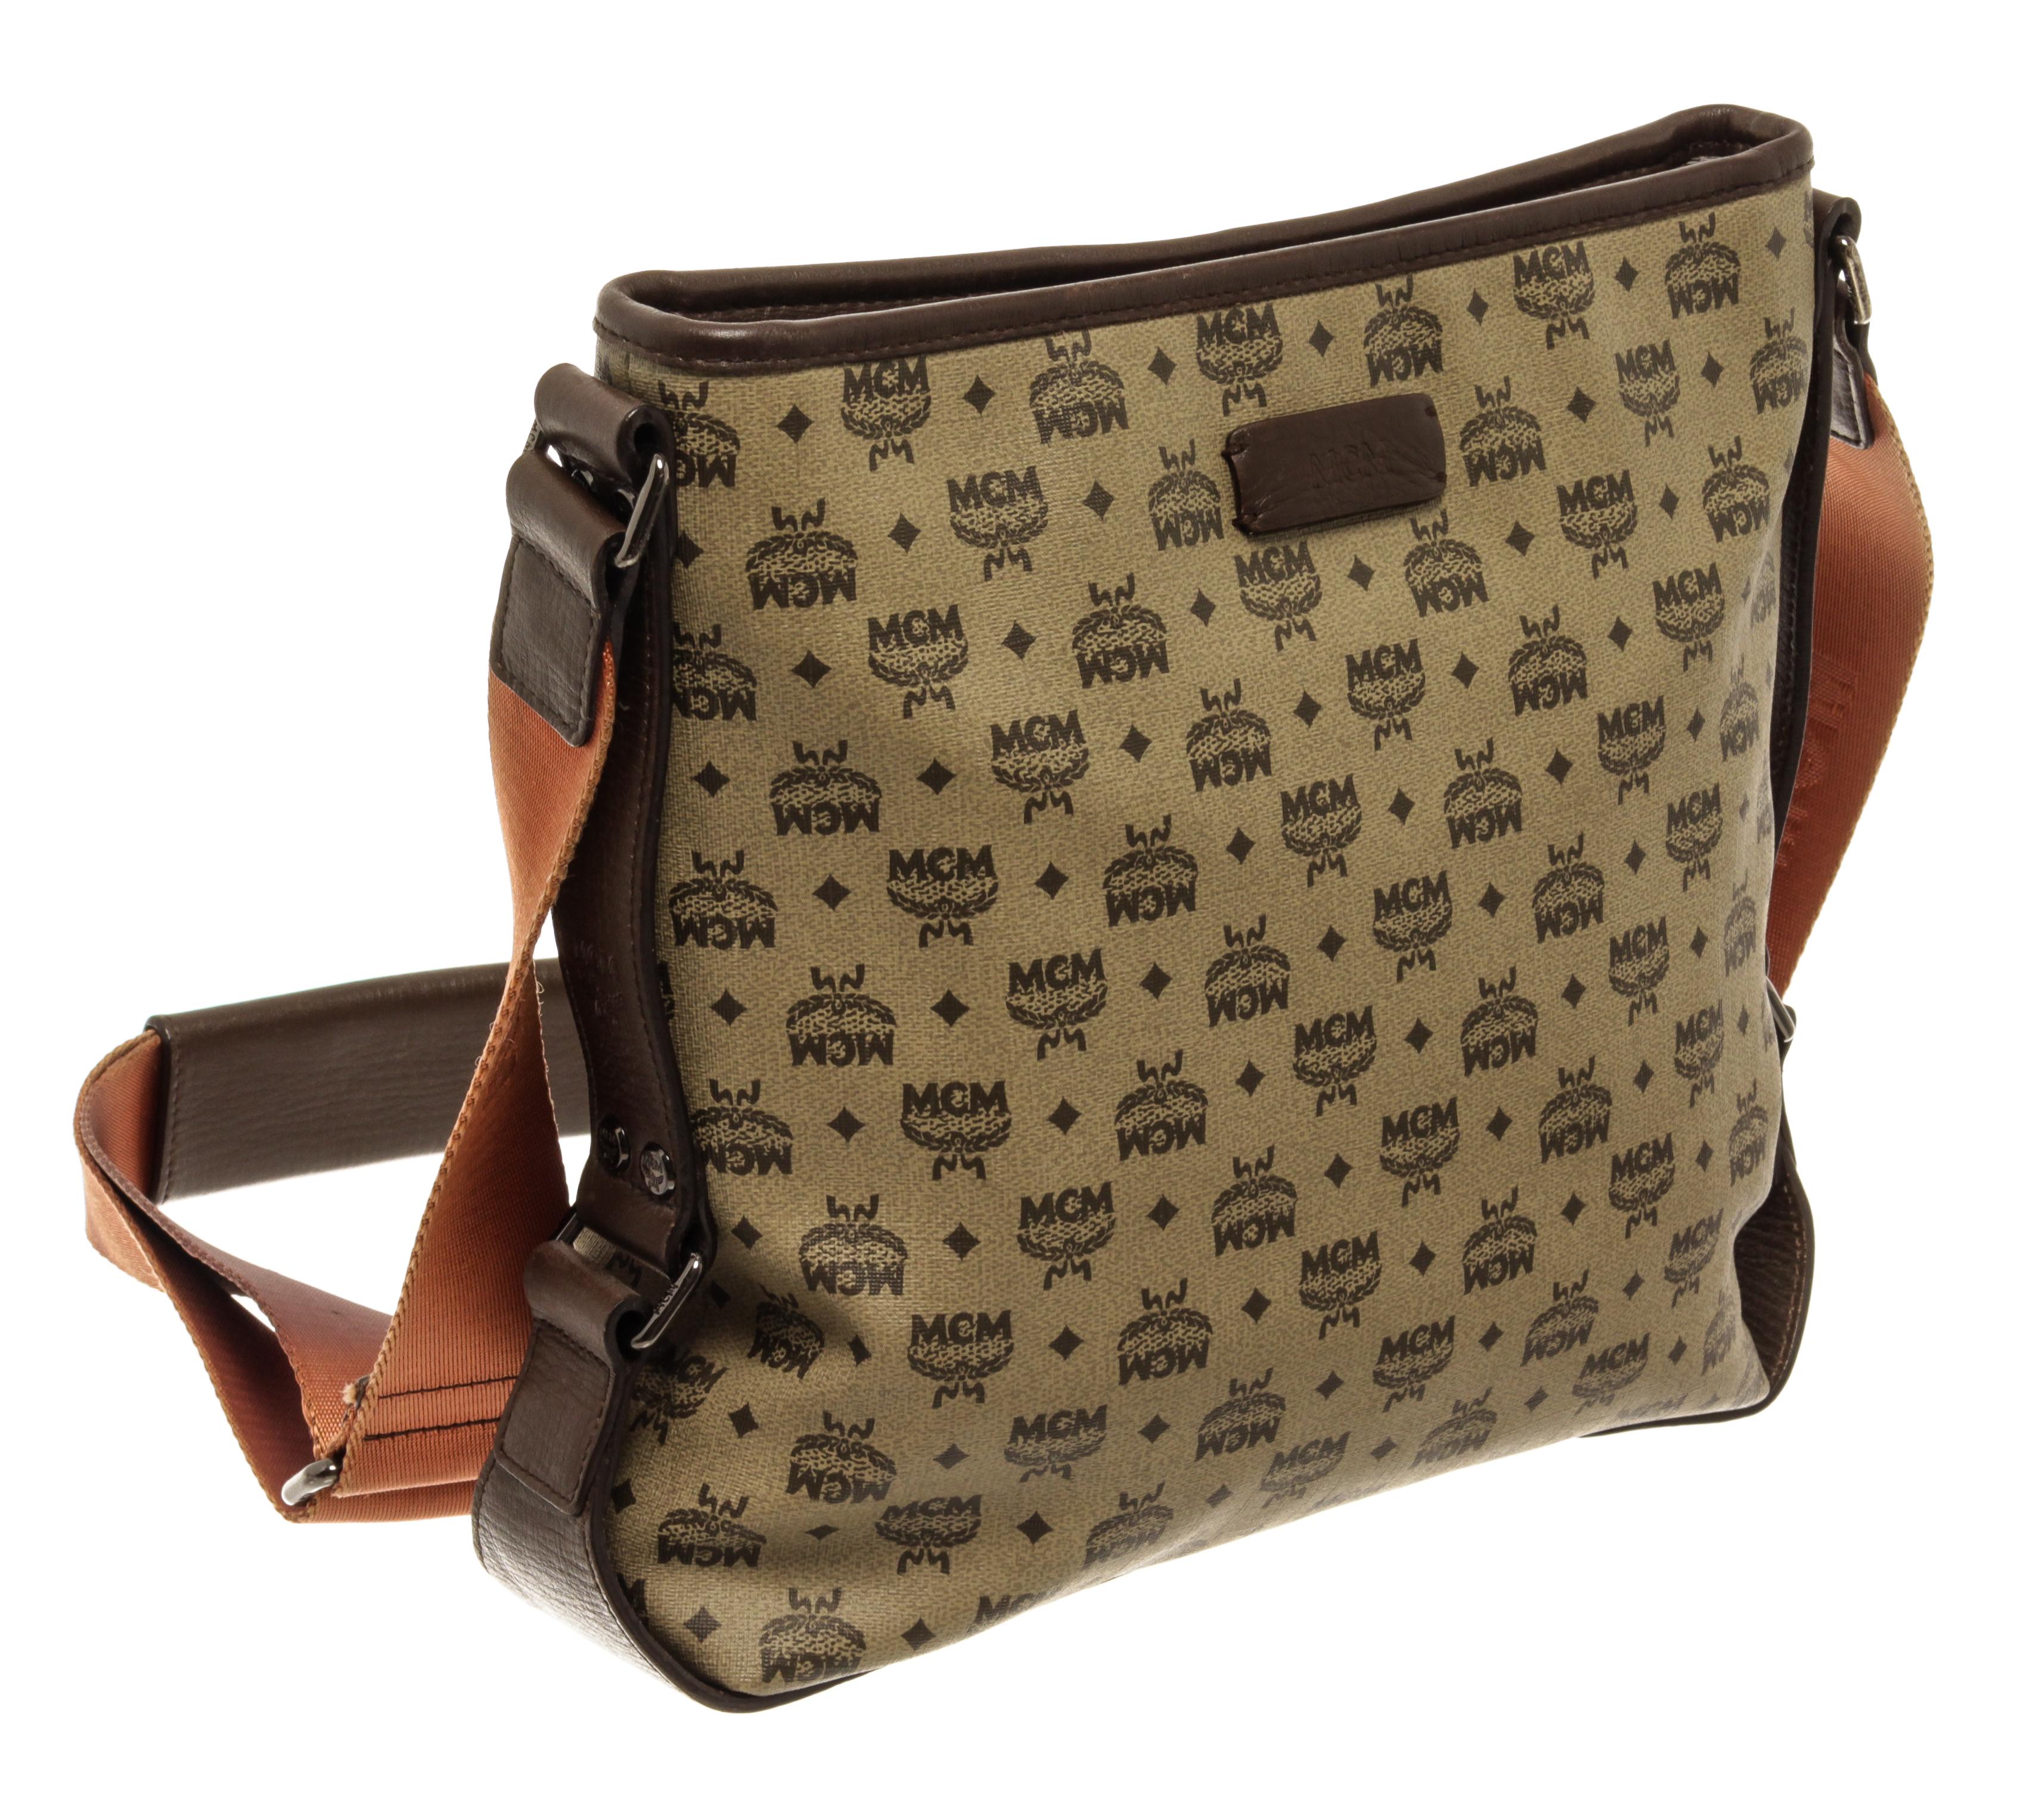 MCM Brown Visetos Coated Canvas with Pouch Crossbody Bag with The Crossbody strap can be adjusted. Has sign of usage on the handles.Has fading on the leather of the bag. Has rubbing and peeling on bottom four corners of the bags. Black sides of the